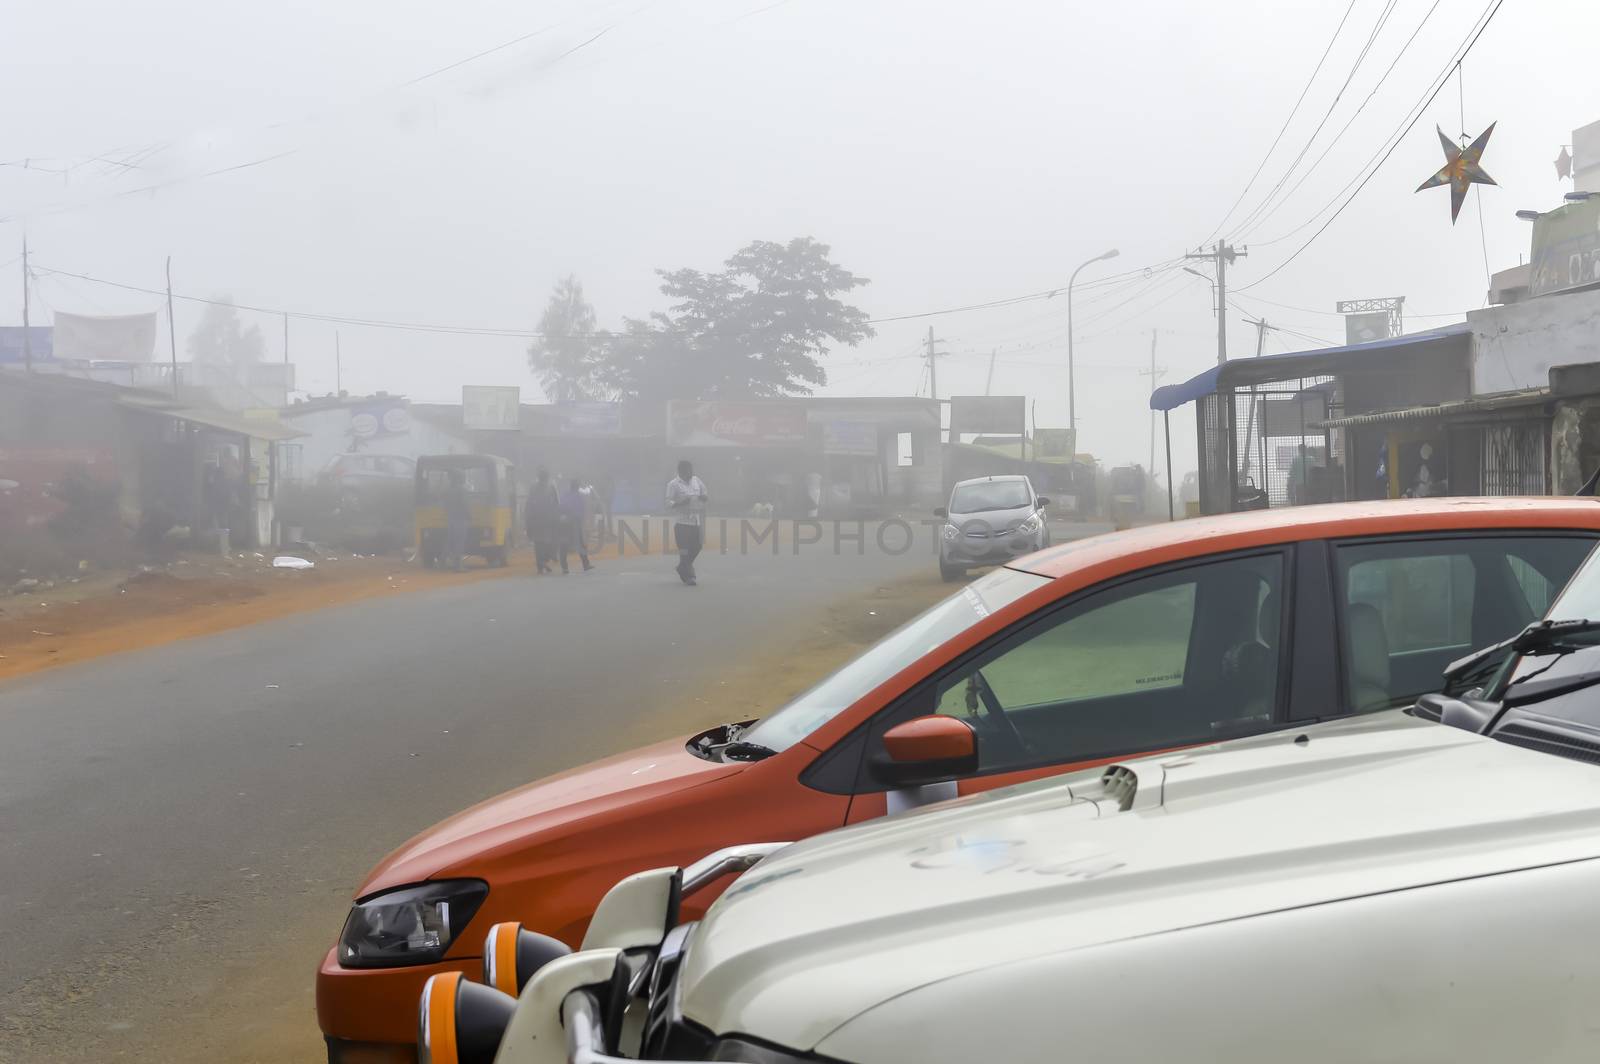 Araku Valley - October, 2017: Red taxi cab parked on empty road. Foggy street scene in winter and rainy weather. Travel vacation holiday concept. by sudiptabhowmick